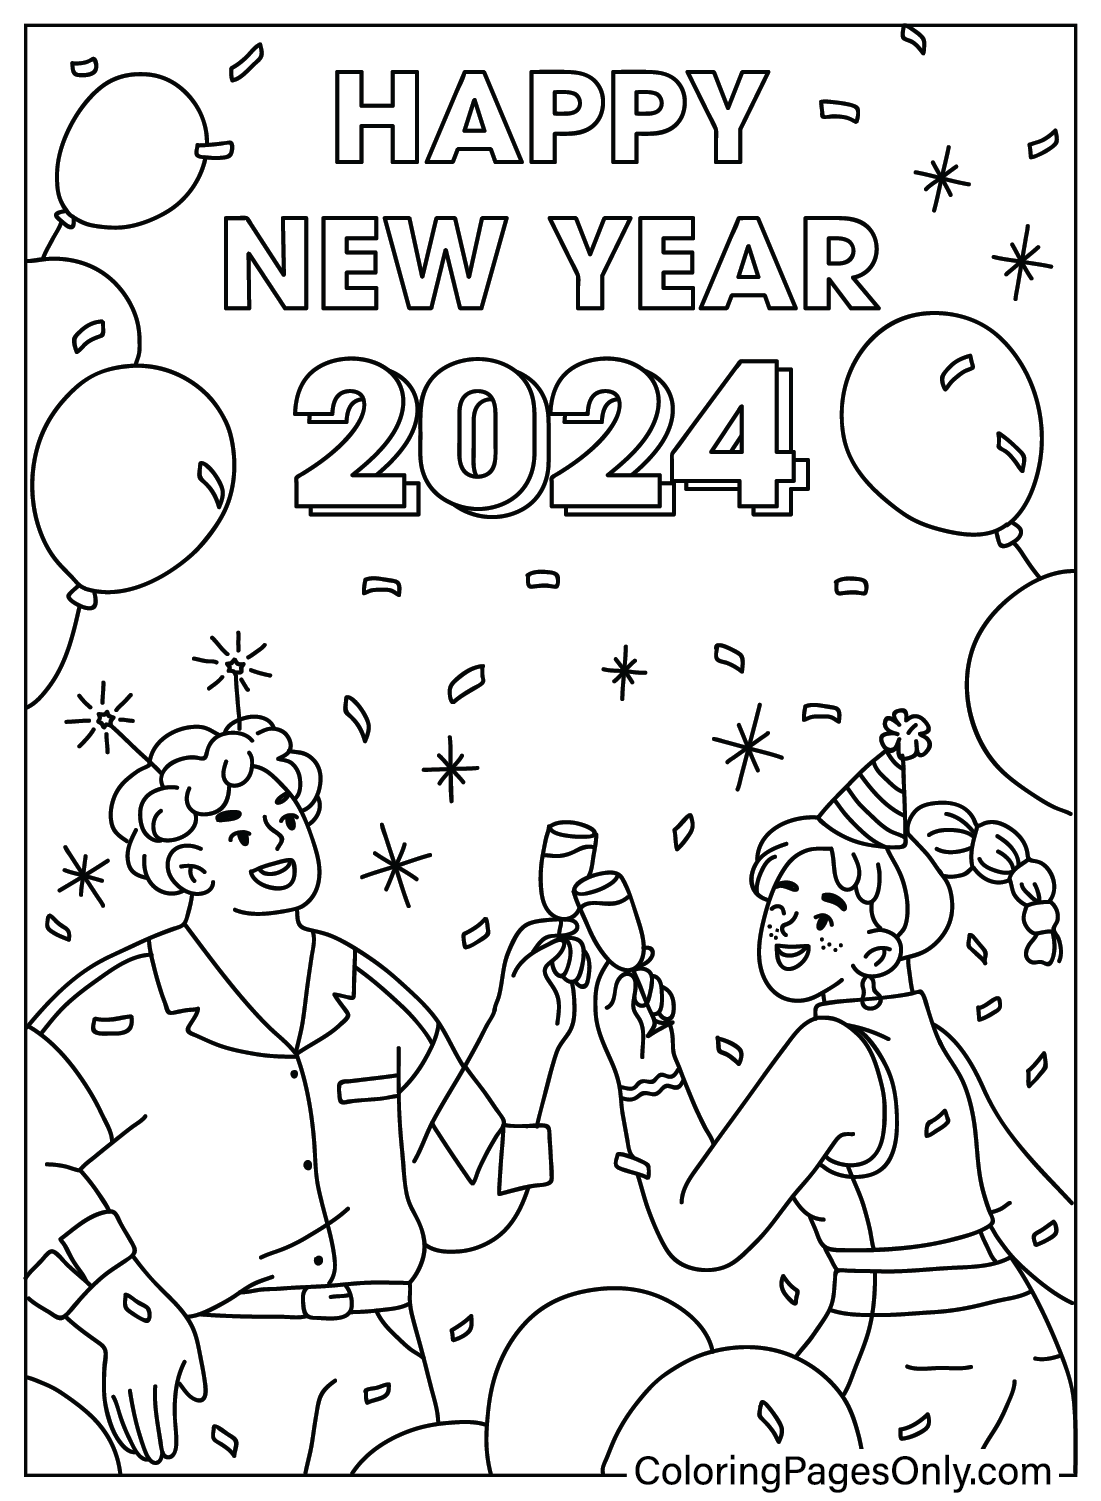 Happy New Year 2024 Coloring Page Images from Happy New Year 2024